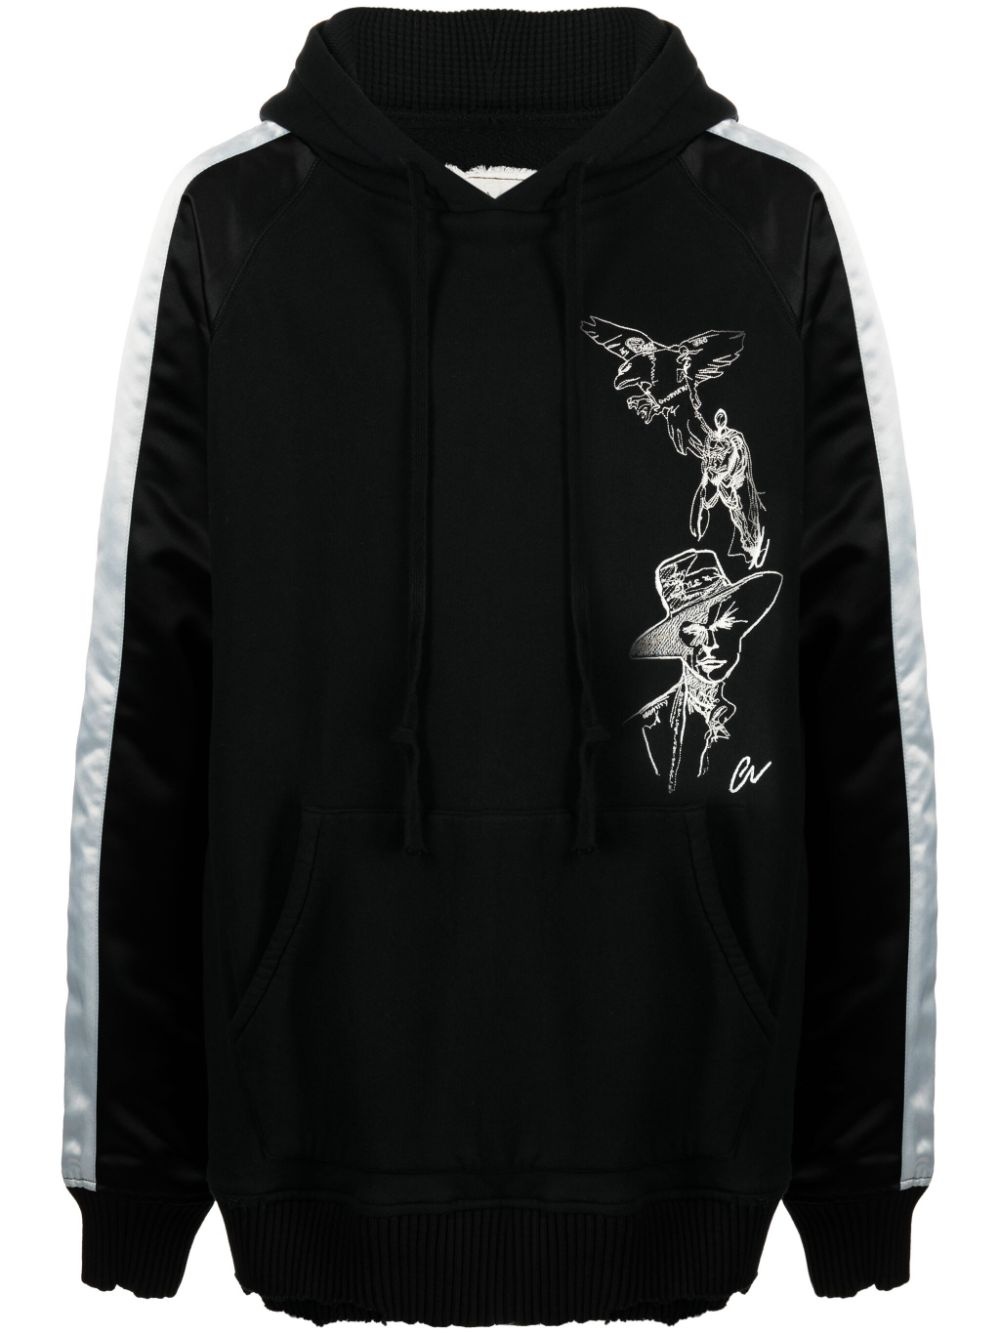 Souvenir embroidered hoodie - 1